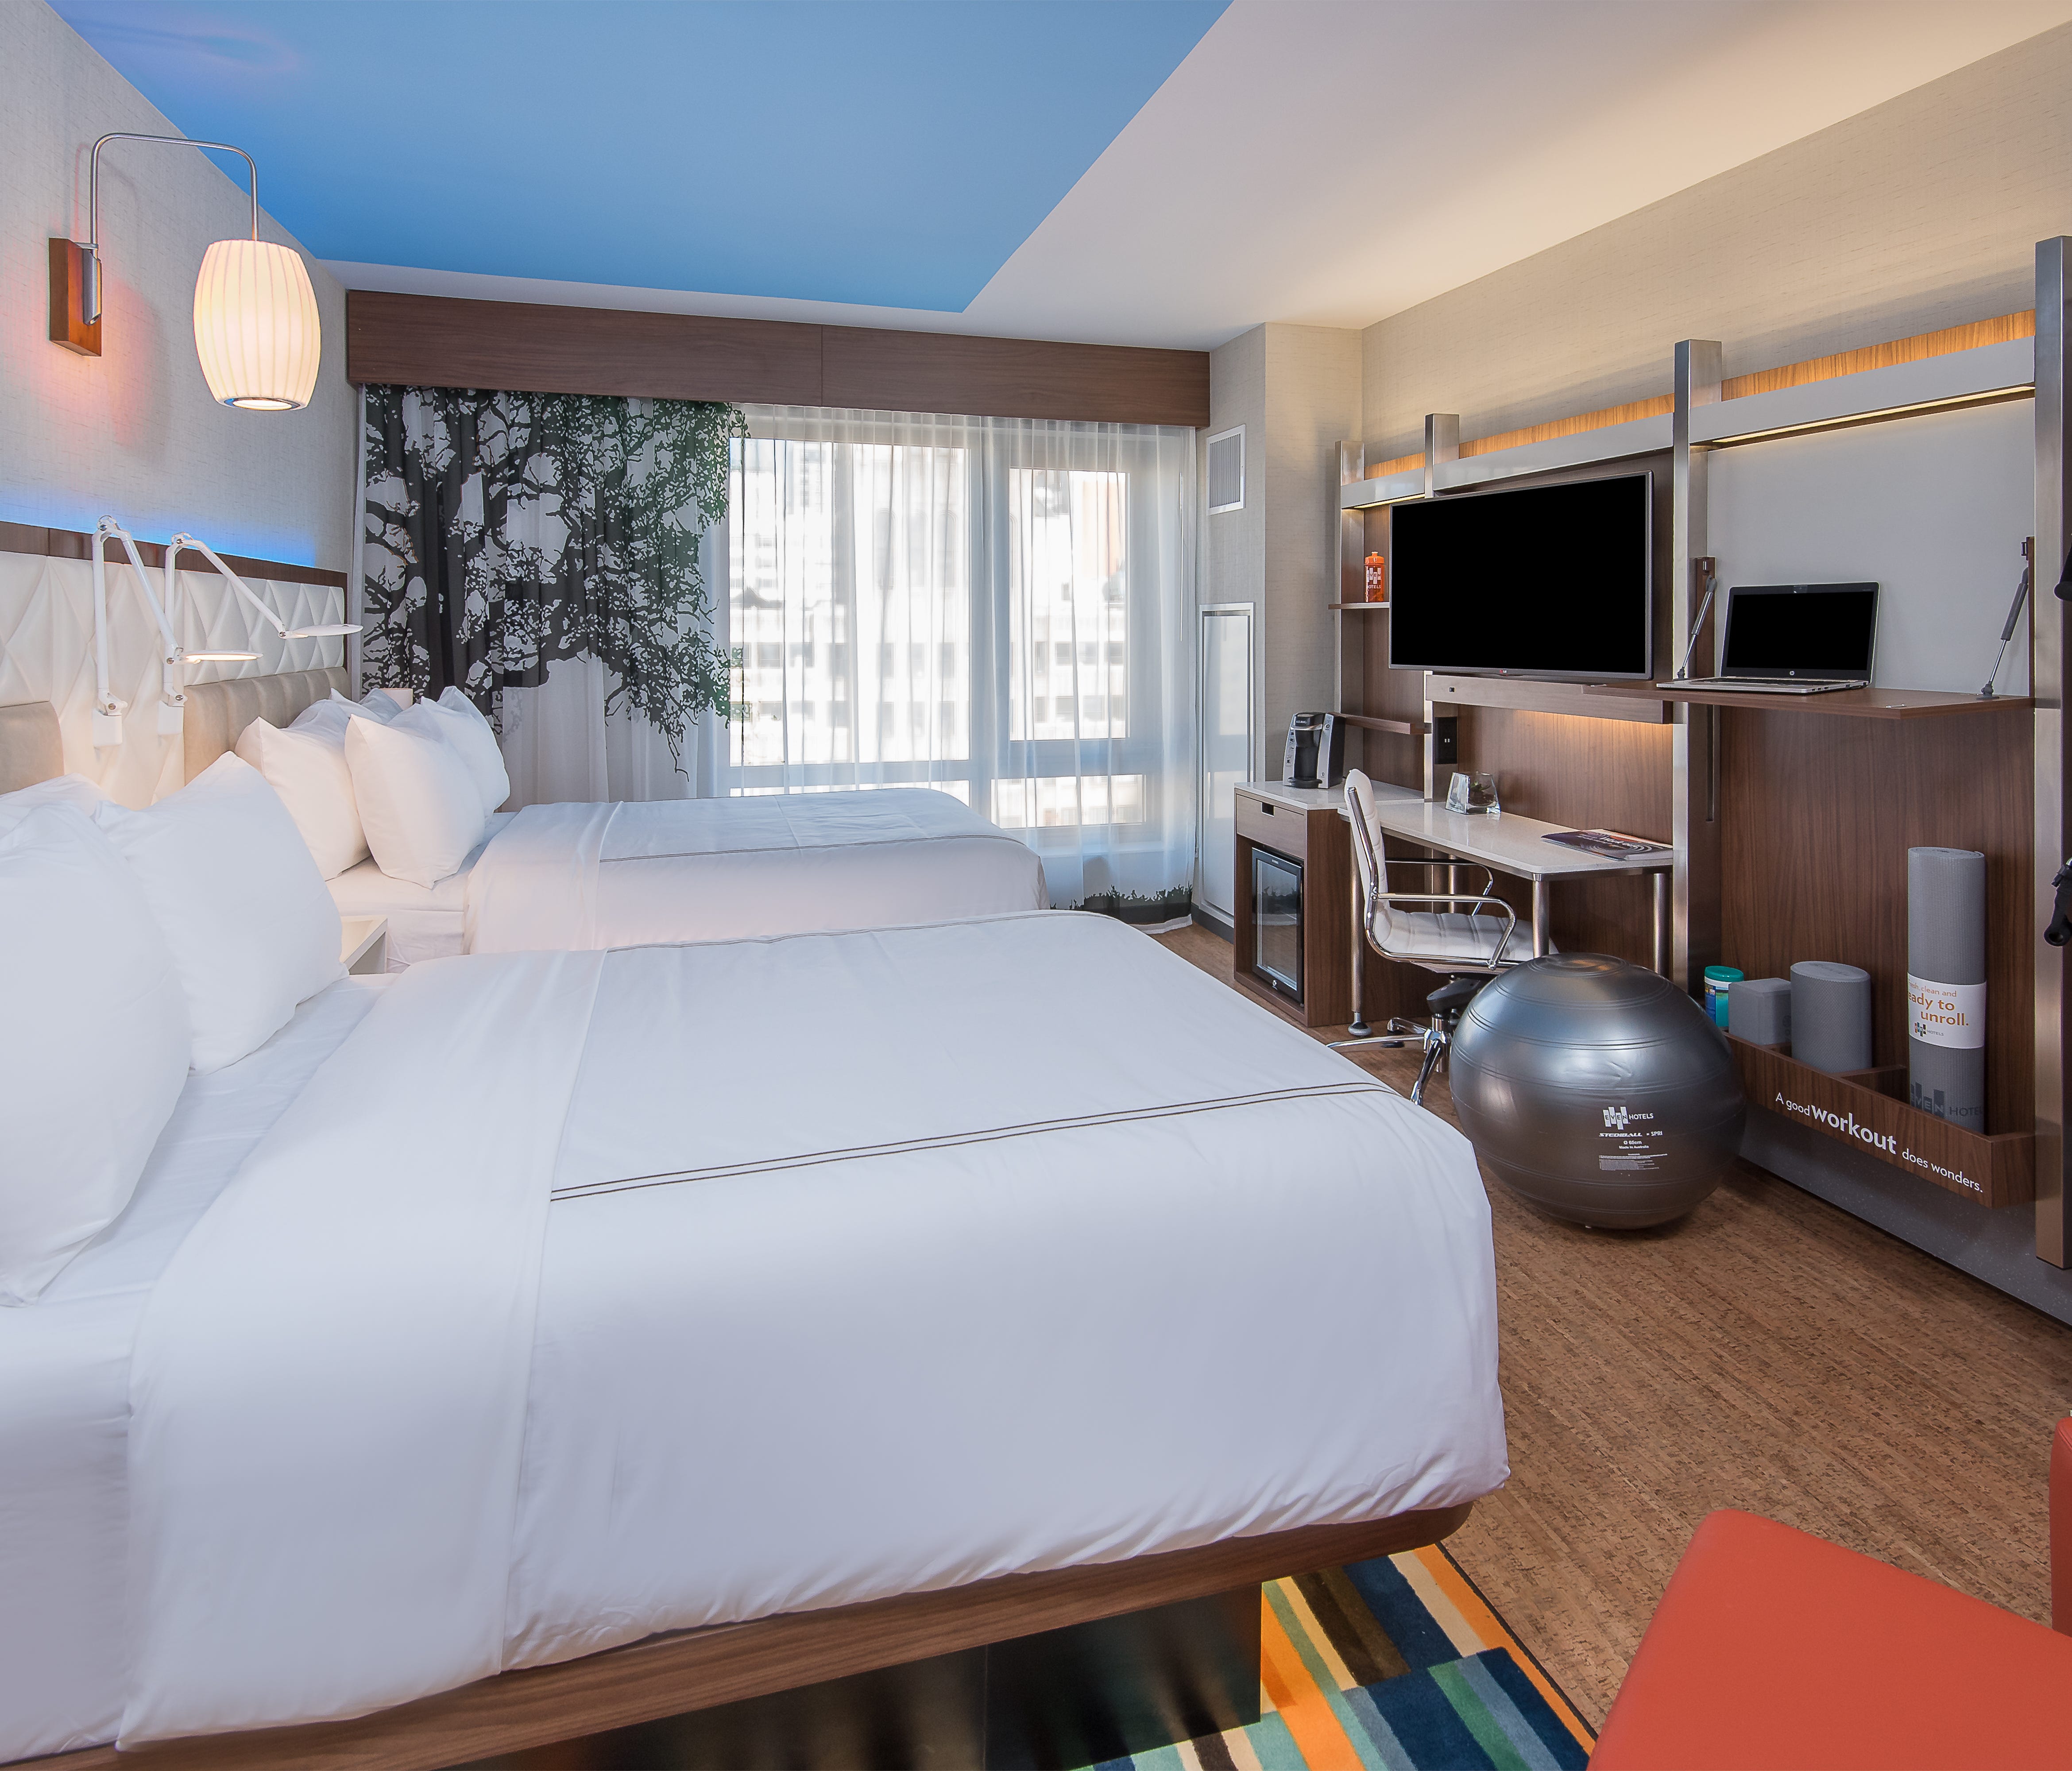 Even Hotels, a brand focused on fitness and wellness, has 15-inch mattresses.